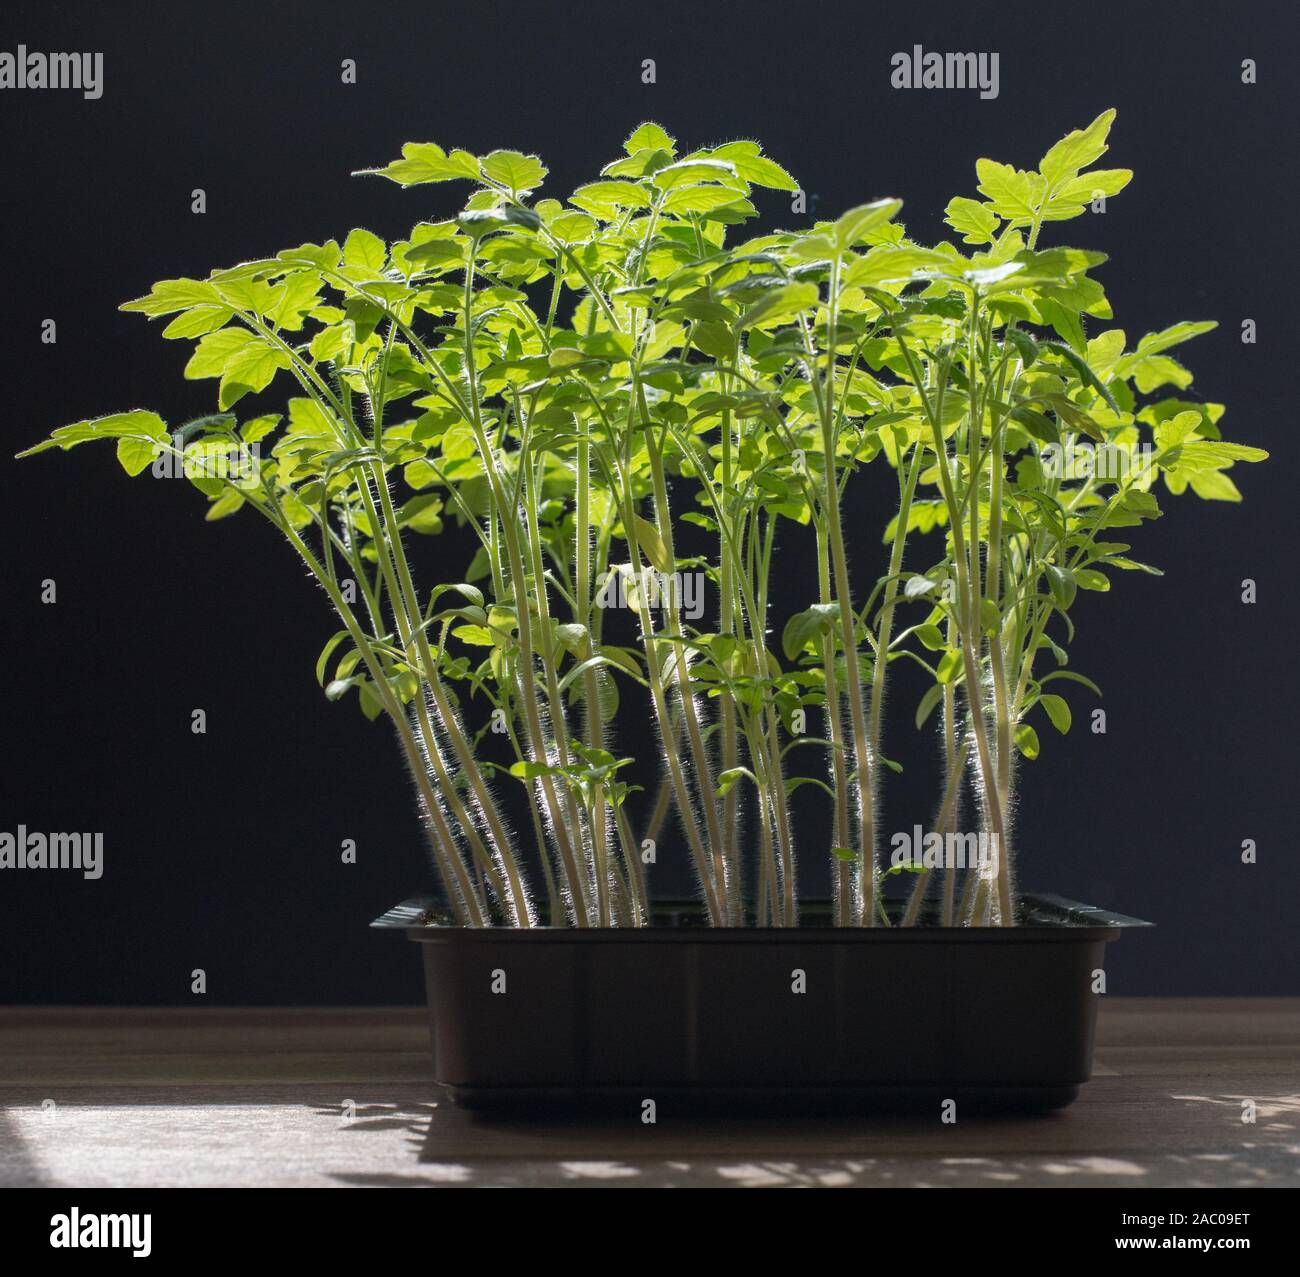 Tomato seedlings in pot with a black background Stock Photo